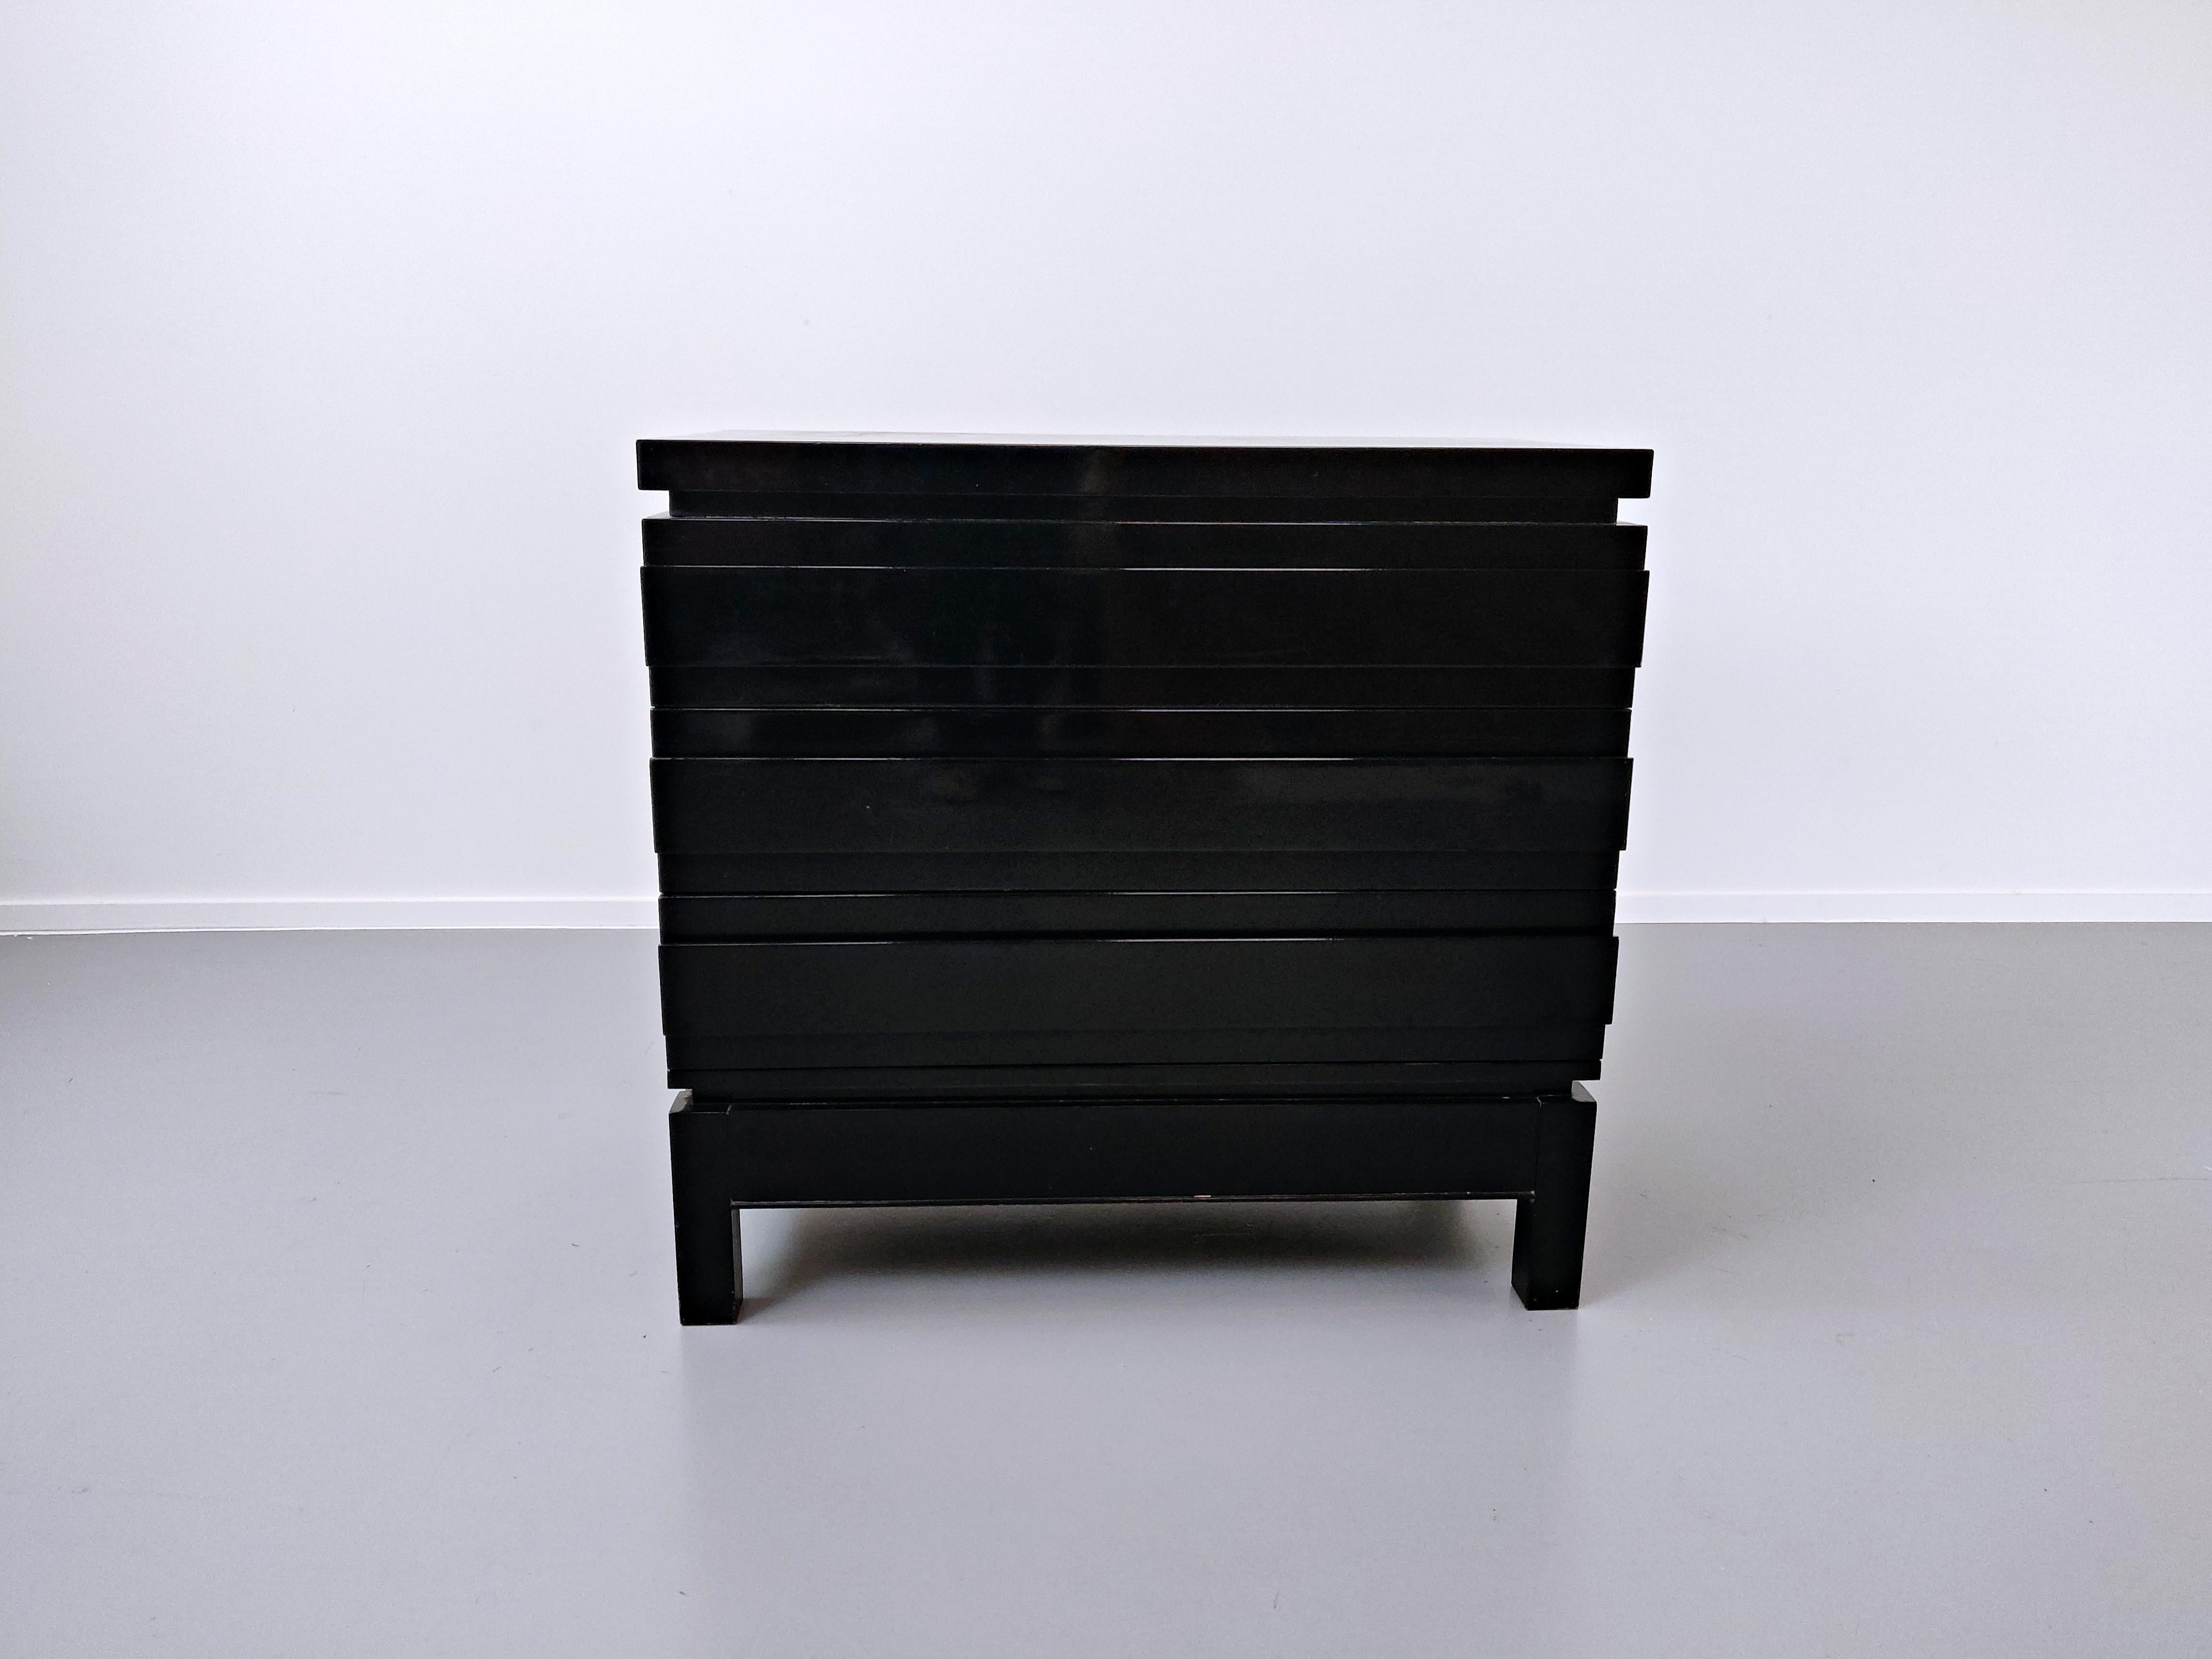 Late 20th Century Black Lacquered Mid-Century Modern Chest of Drawers by Emile Veranneman, Belgium